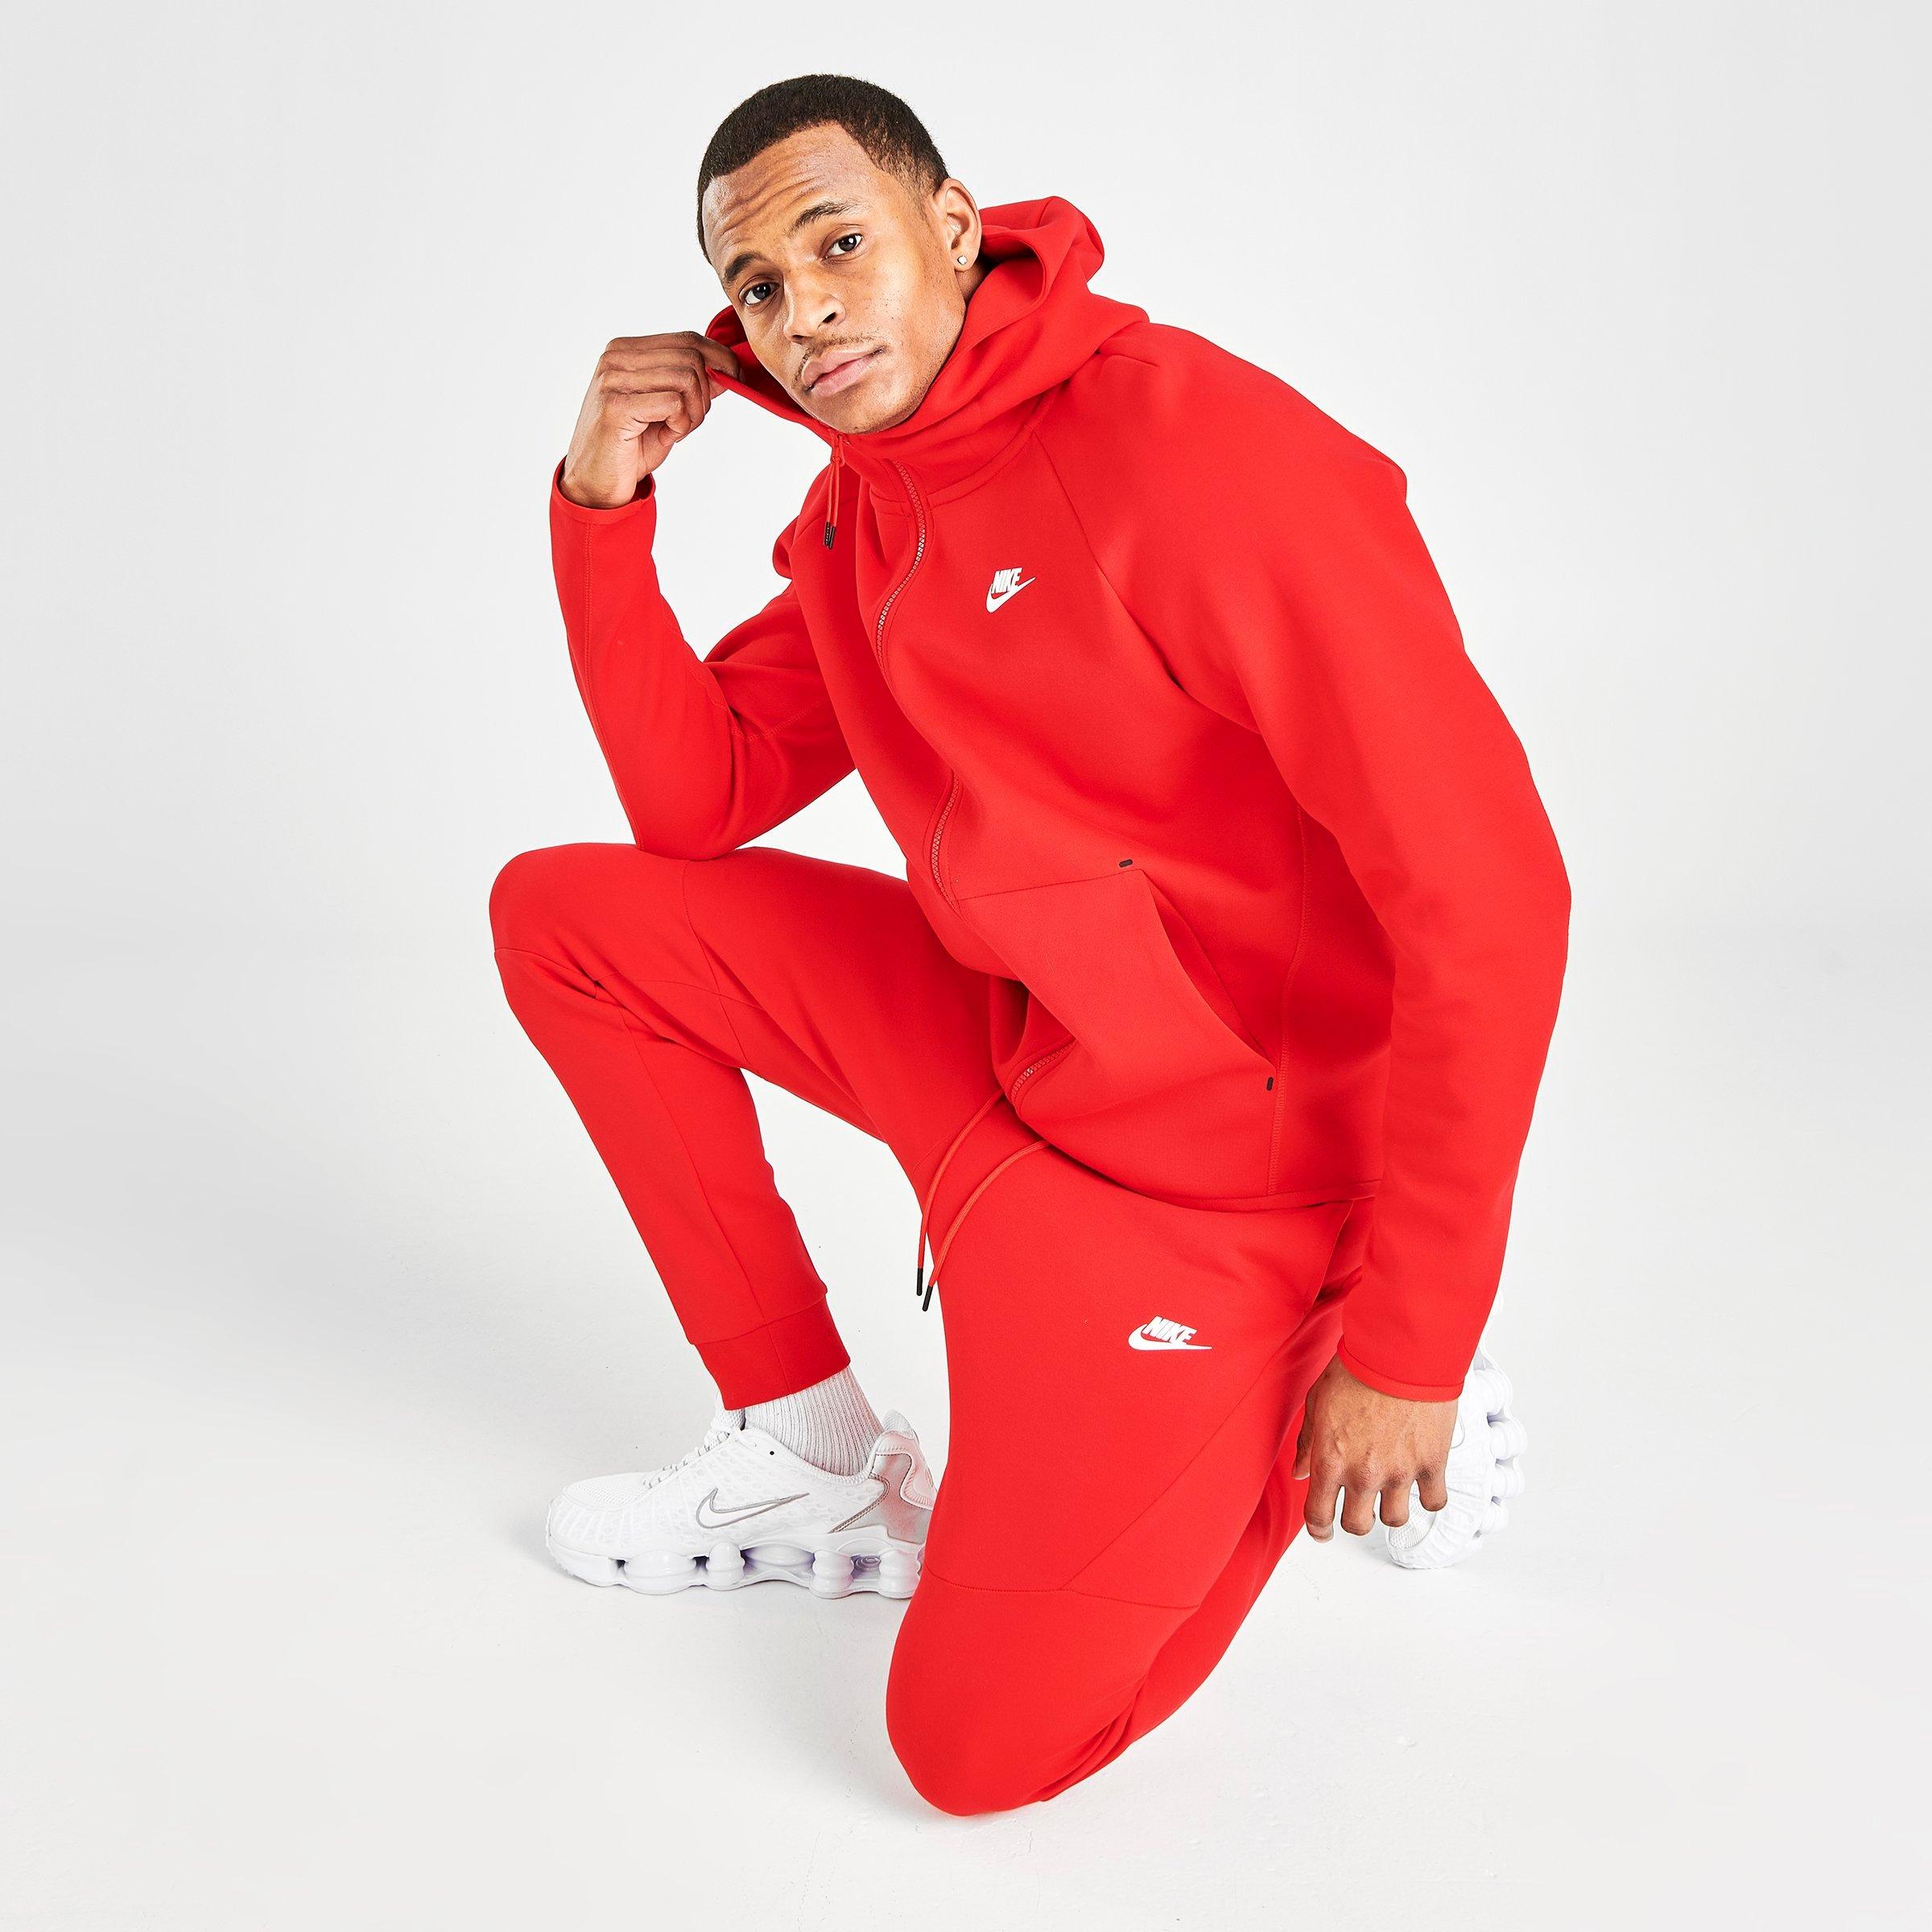 white and red nike sweatsuit